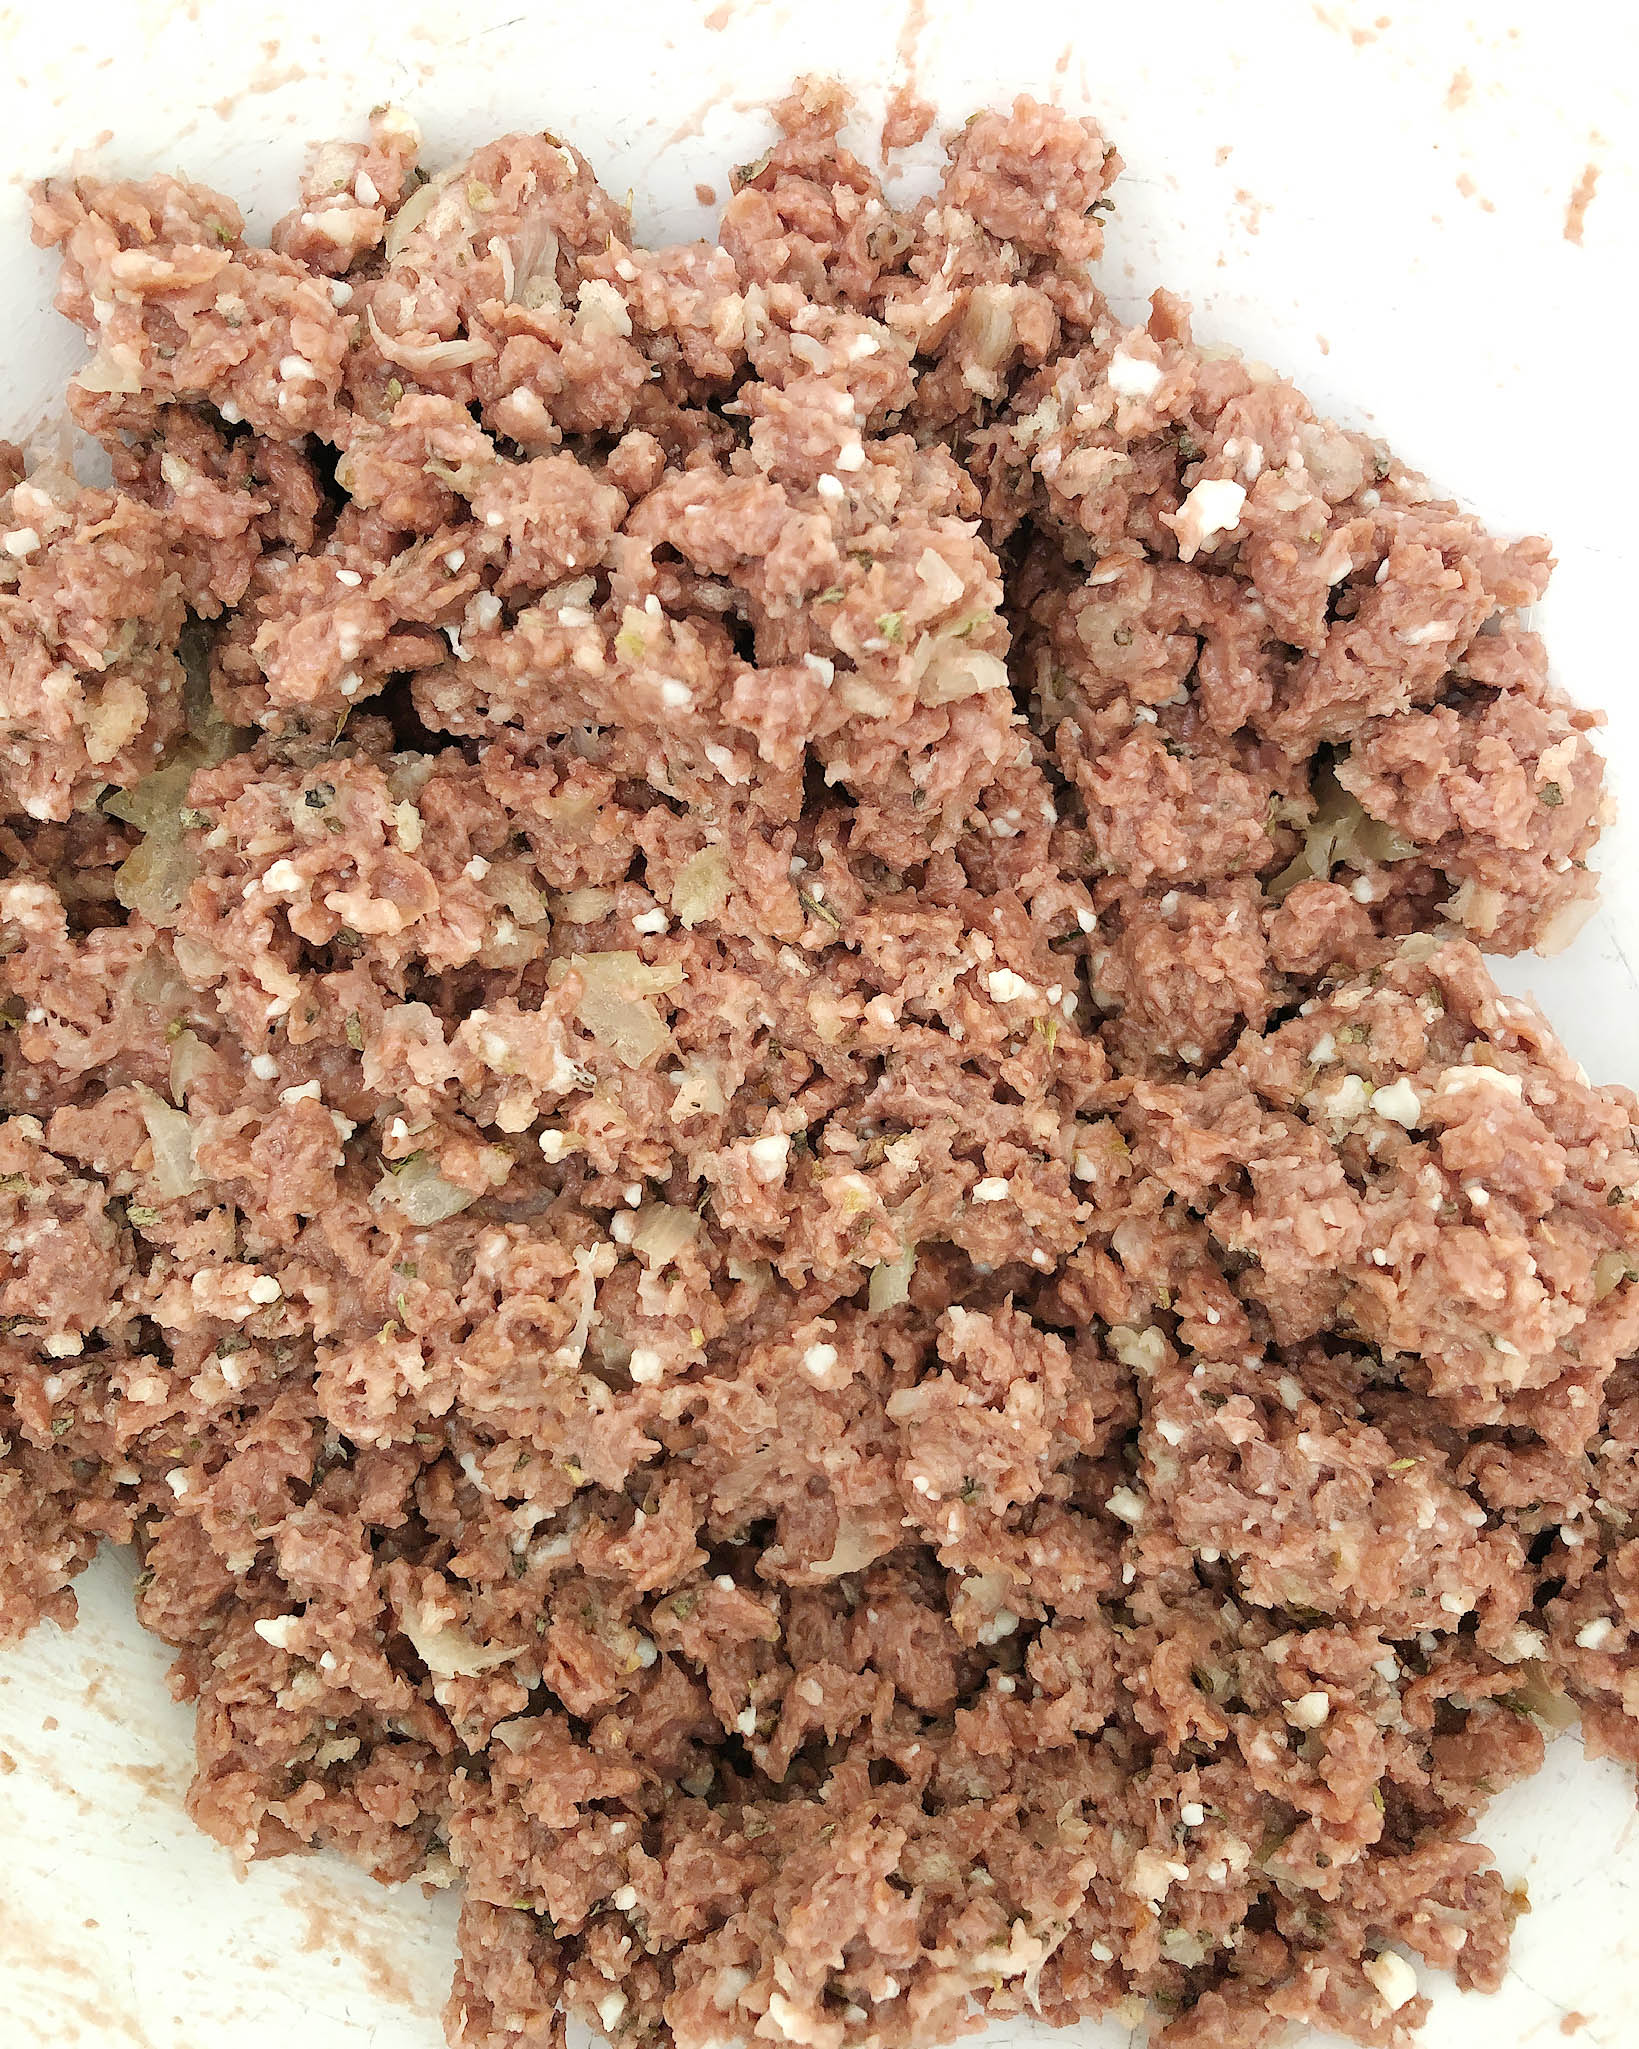 Top-down shot of finished mixture for Beyond Meat Meatballs - meat, spices, and breadcrumbs mixed together